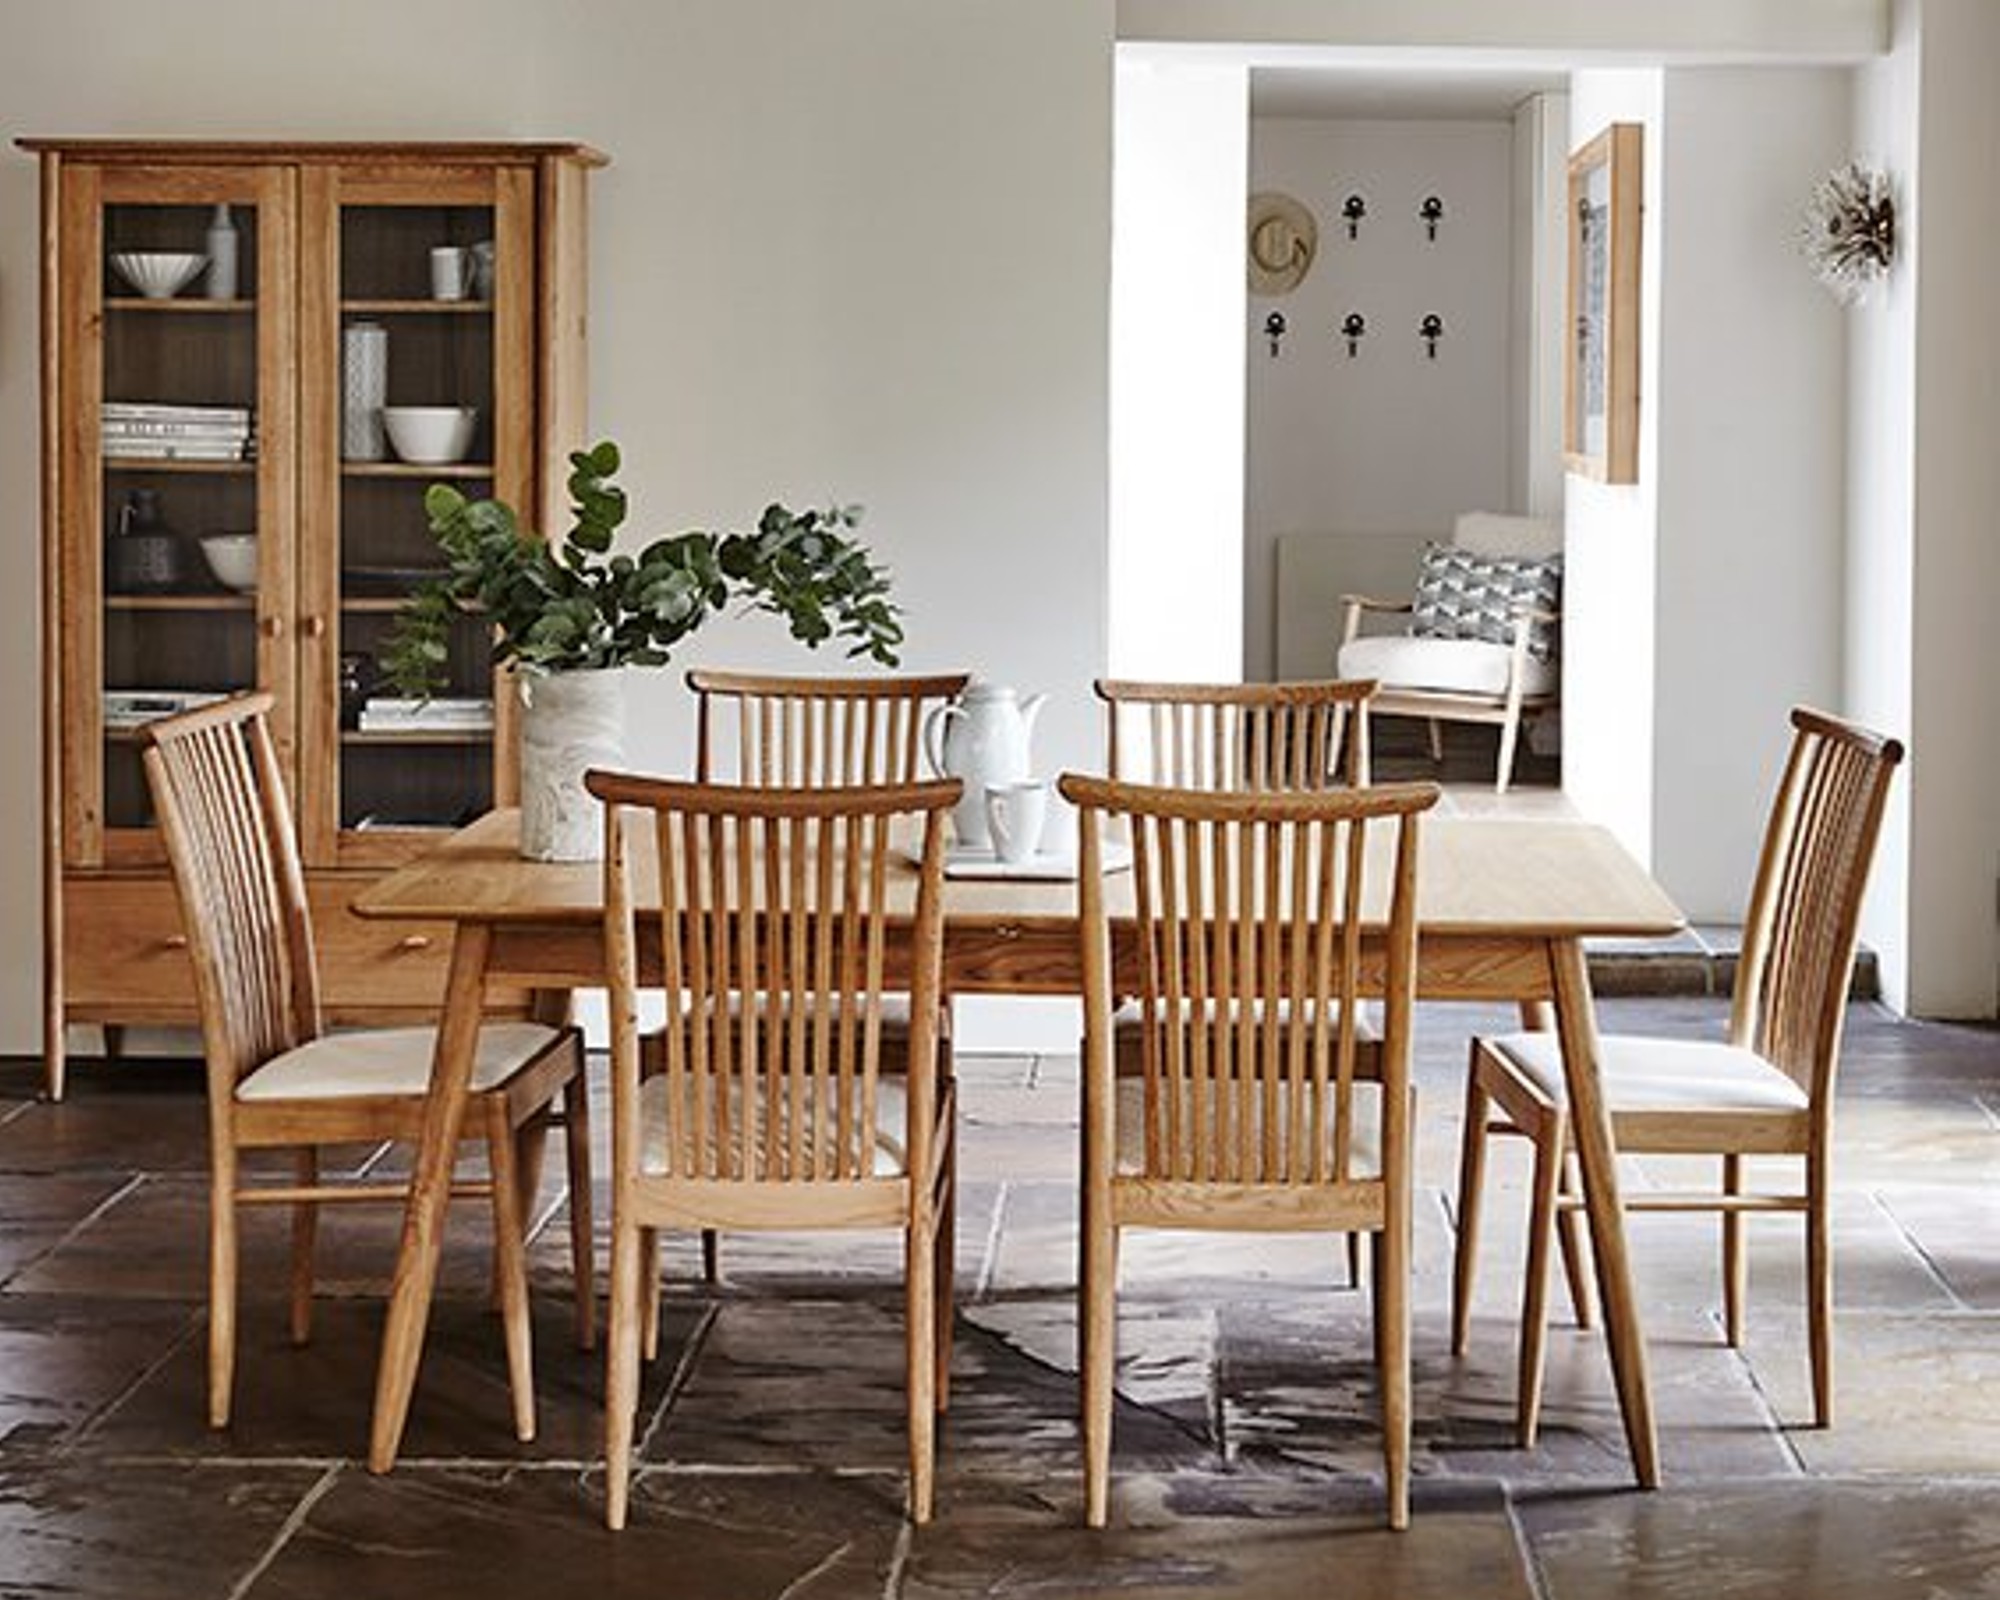 Ercol Teramo dining table and chairs